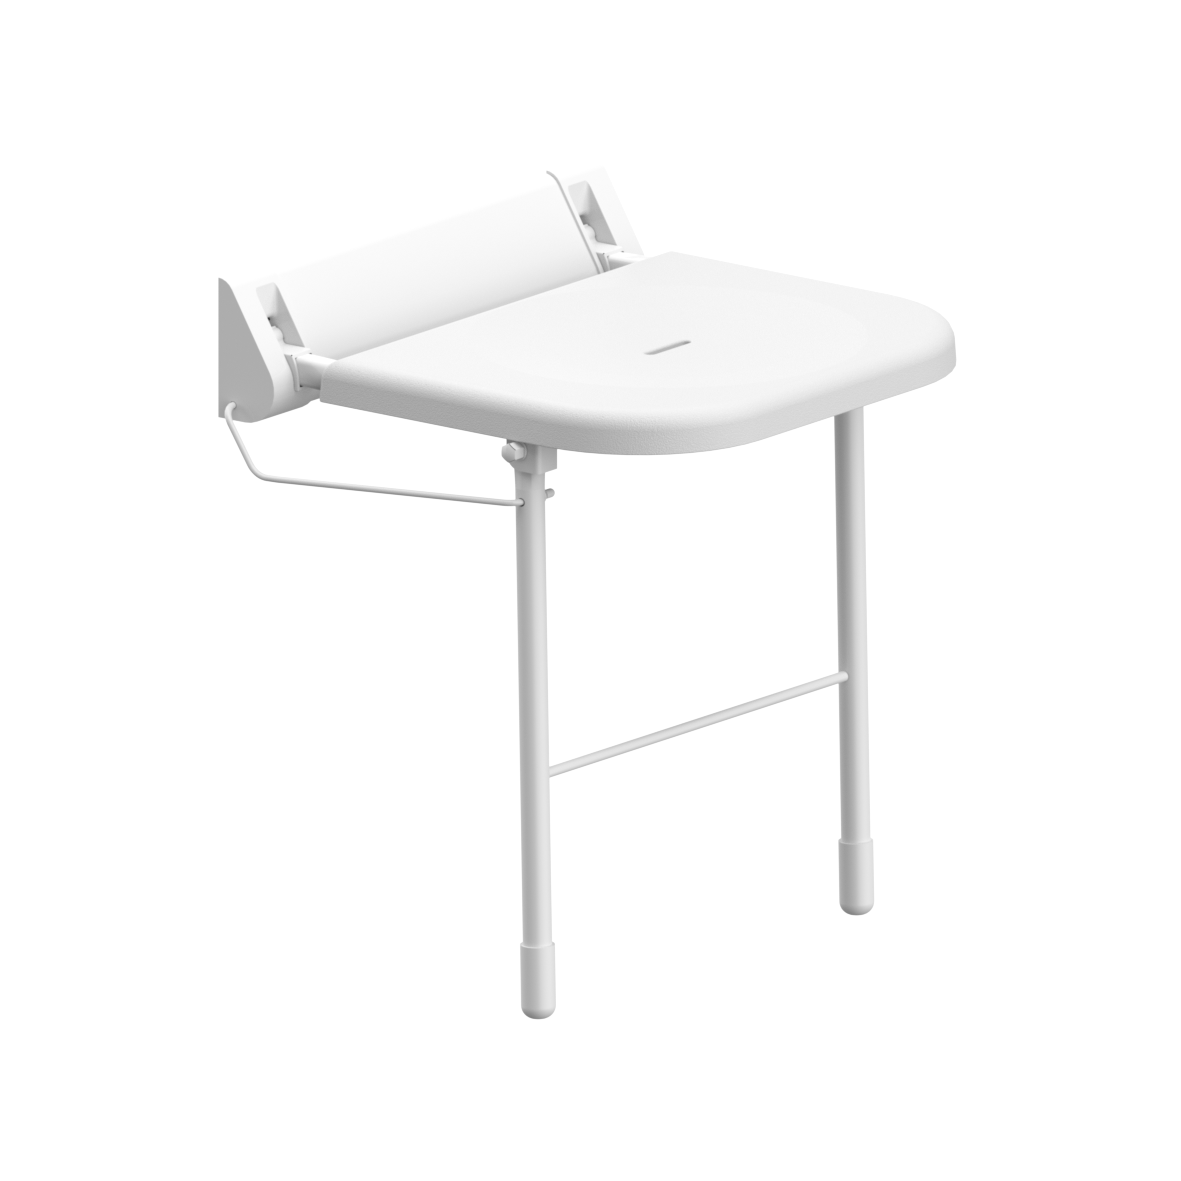 Eco Care Lift-up shower seat, with support feet, 473 x 407 x 550 mm, White